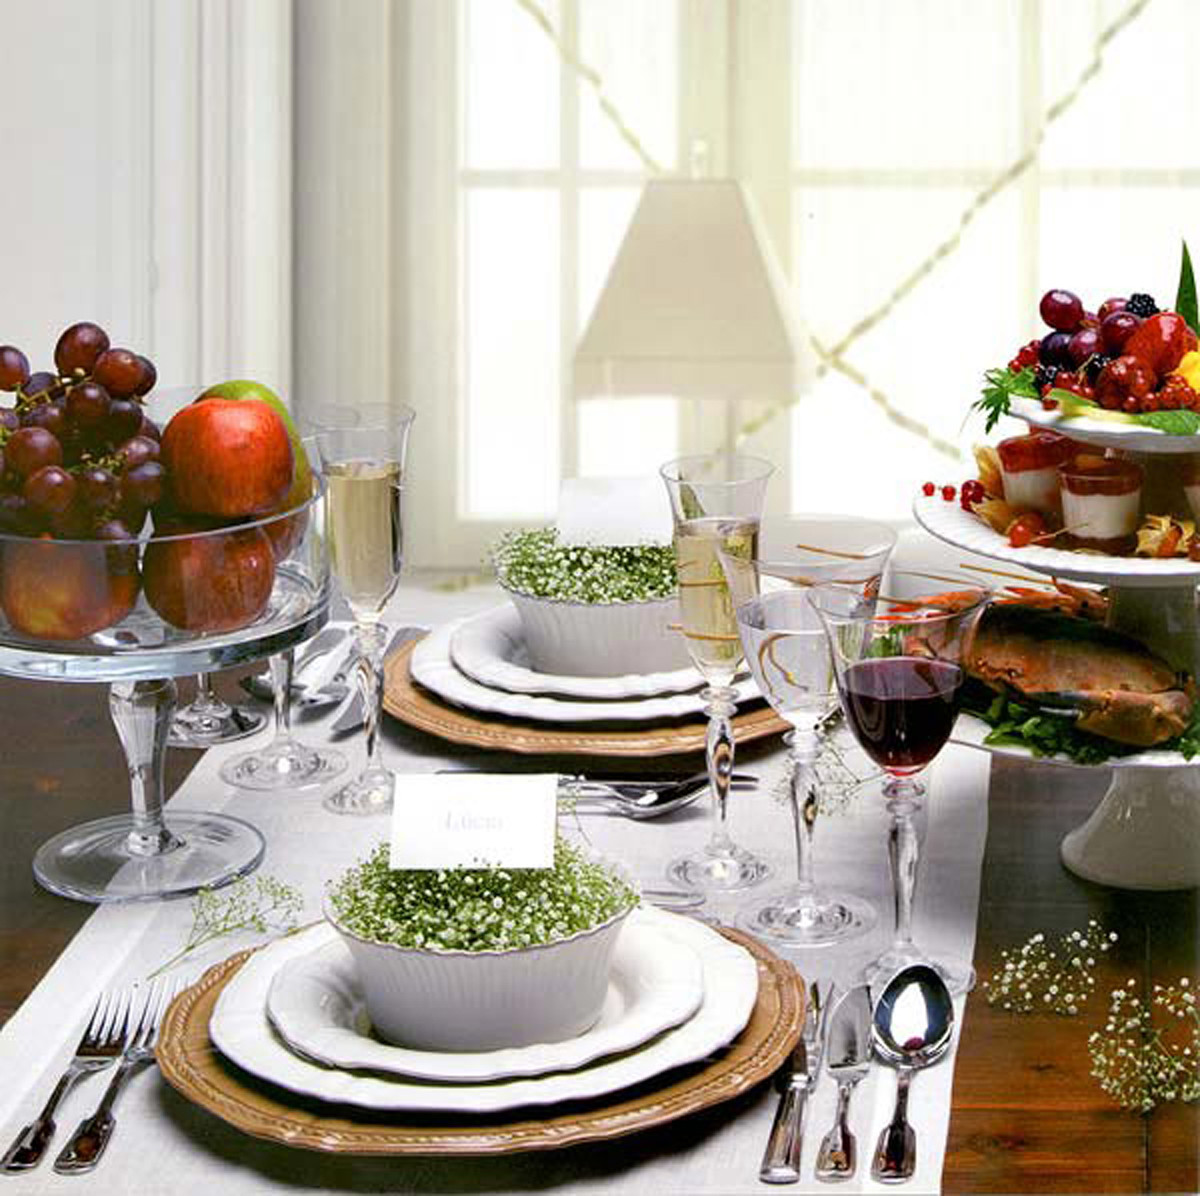 Christmas Dining Table Decorating
 natural dining table decor for christmas 2010 Iroonie